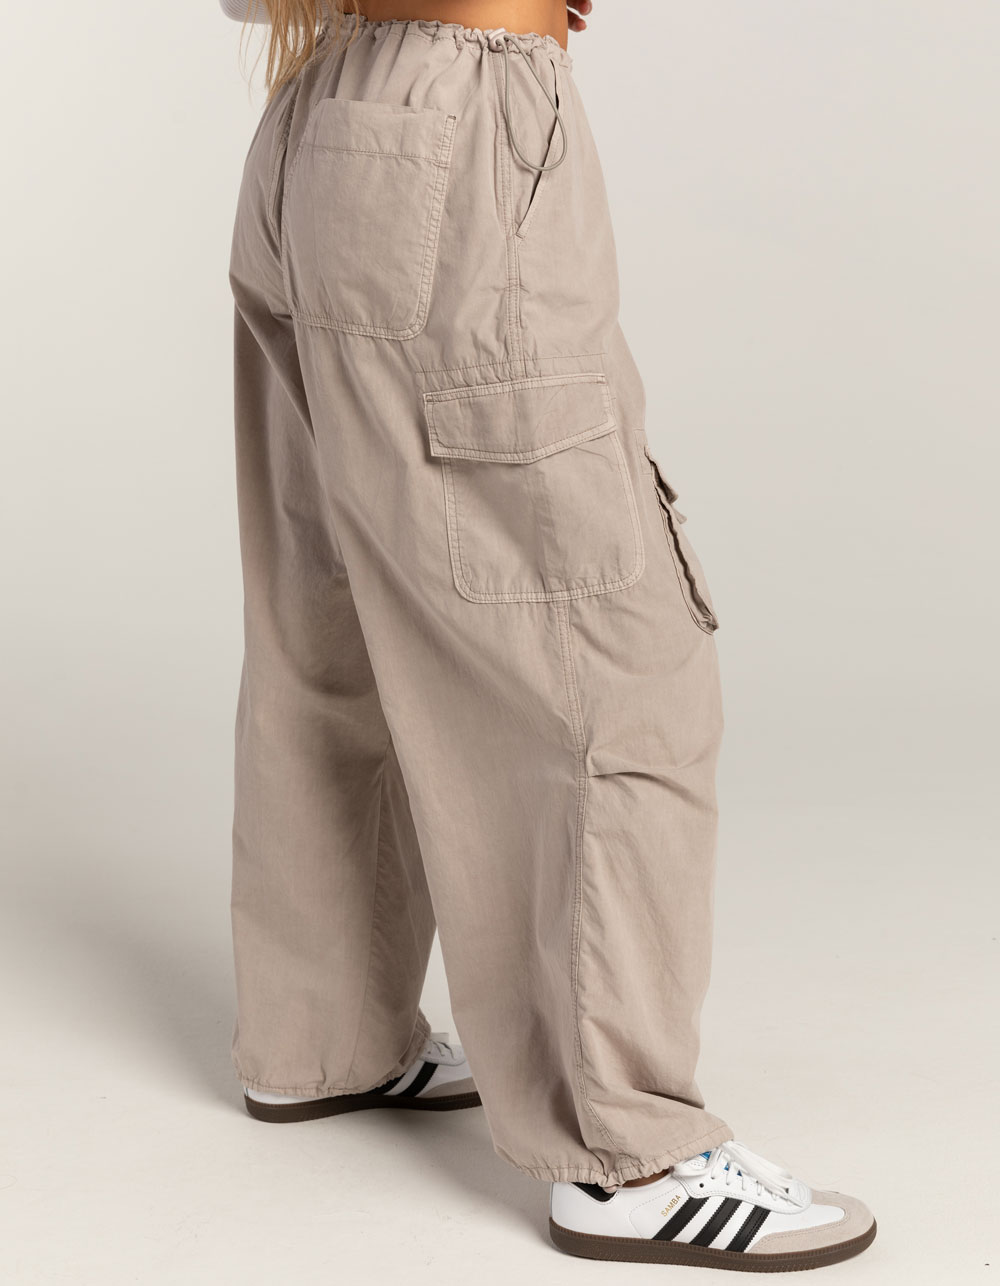 BDG Urban Outfitters Maxi Pocket Womens Tech Pants - STONE | Tillys